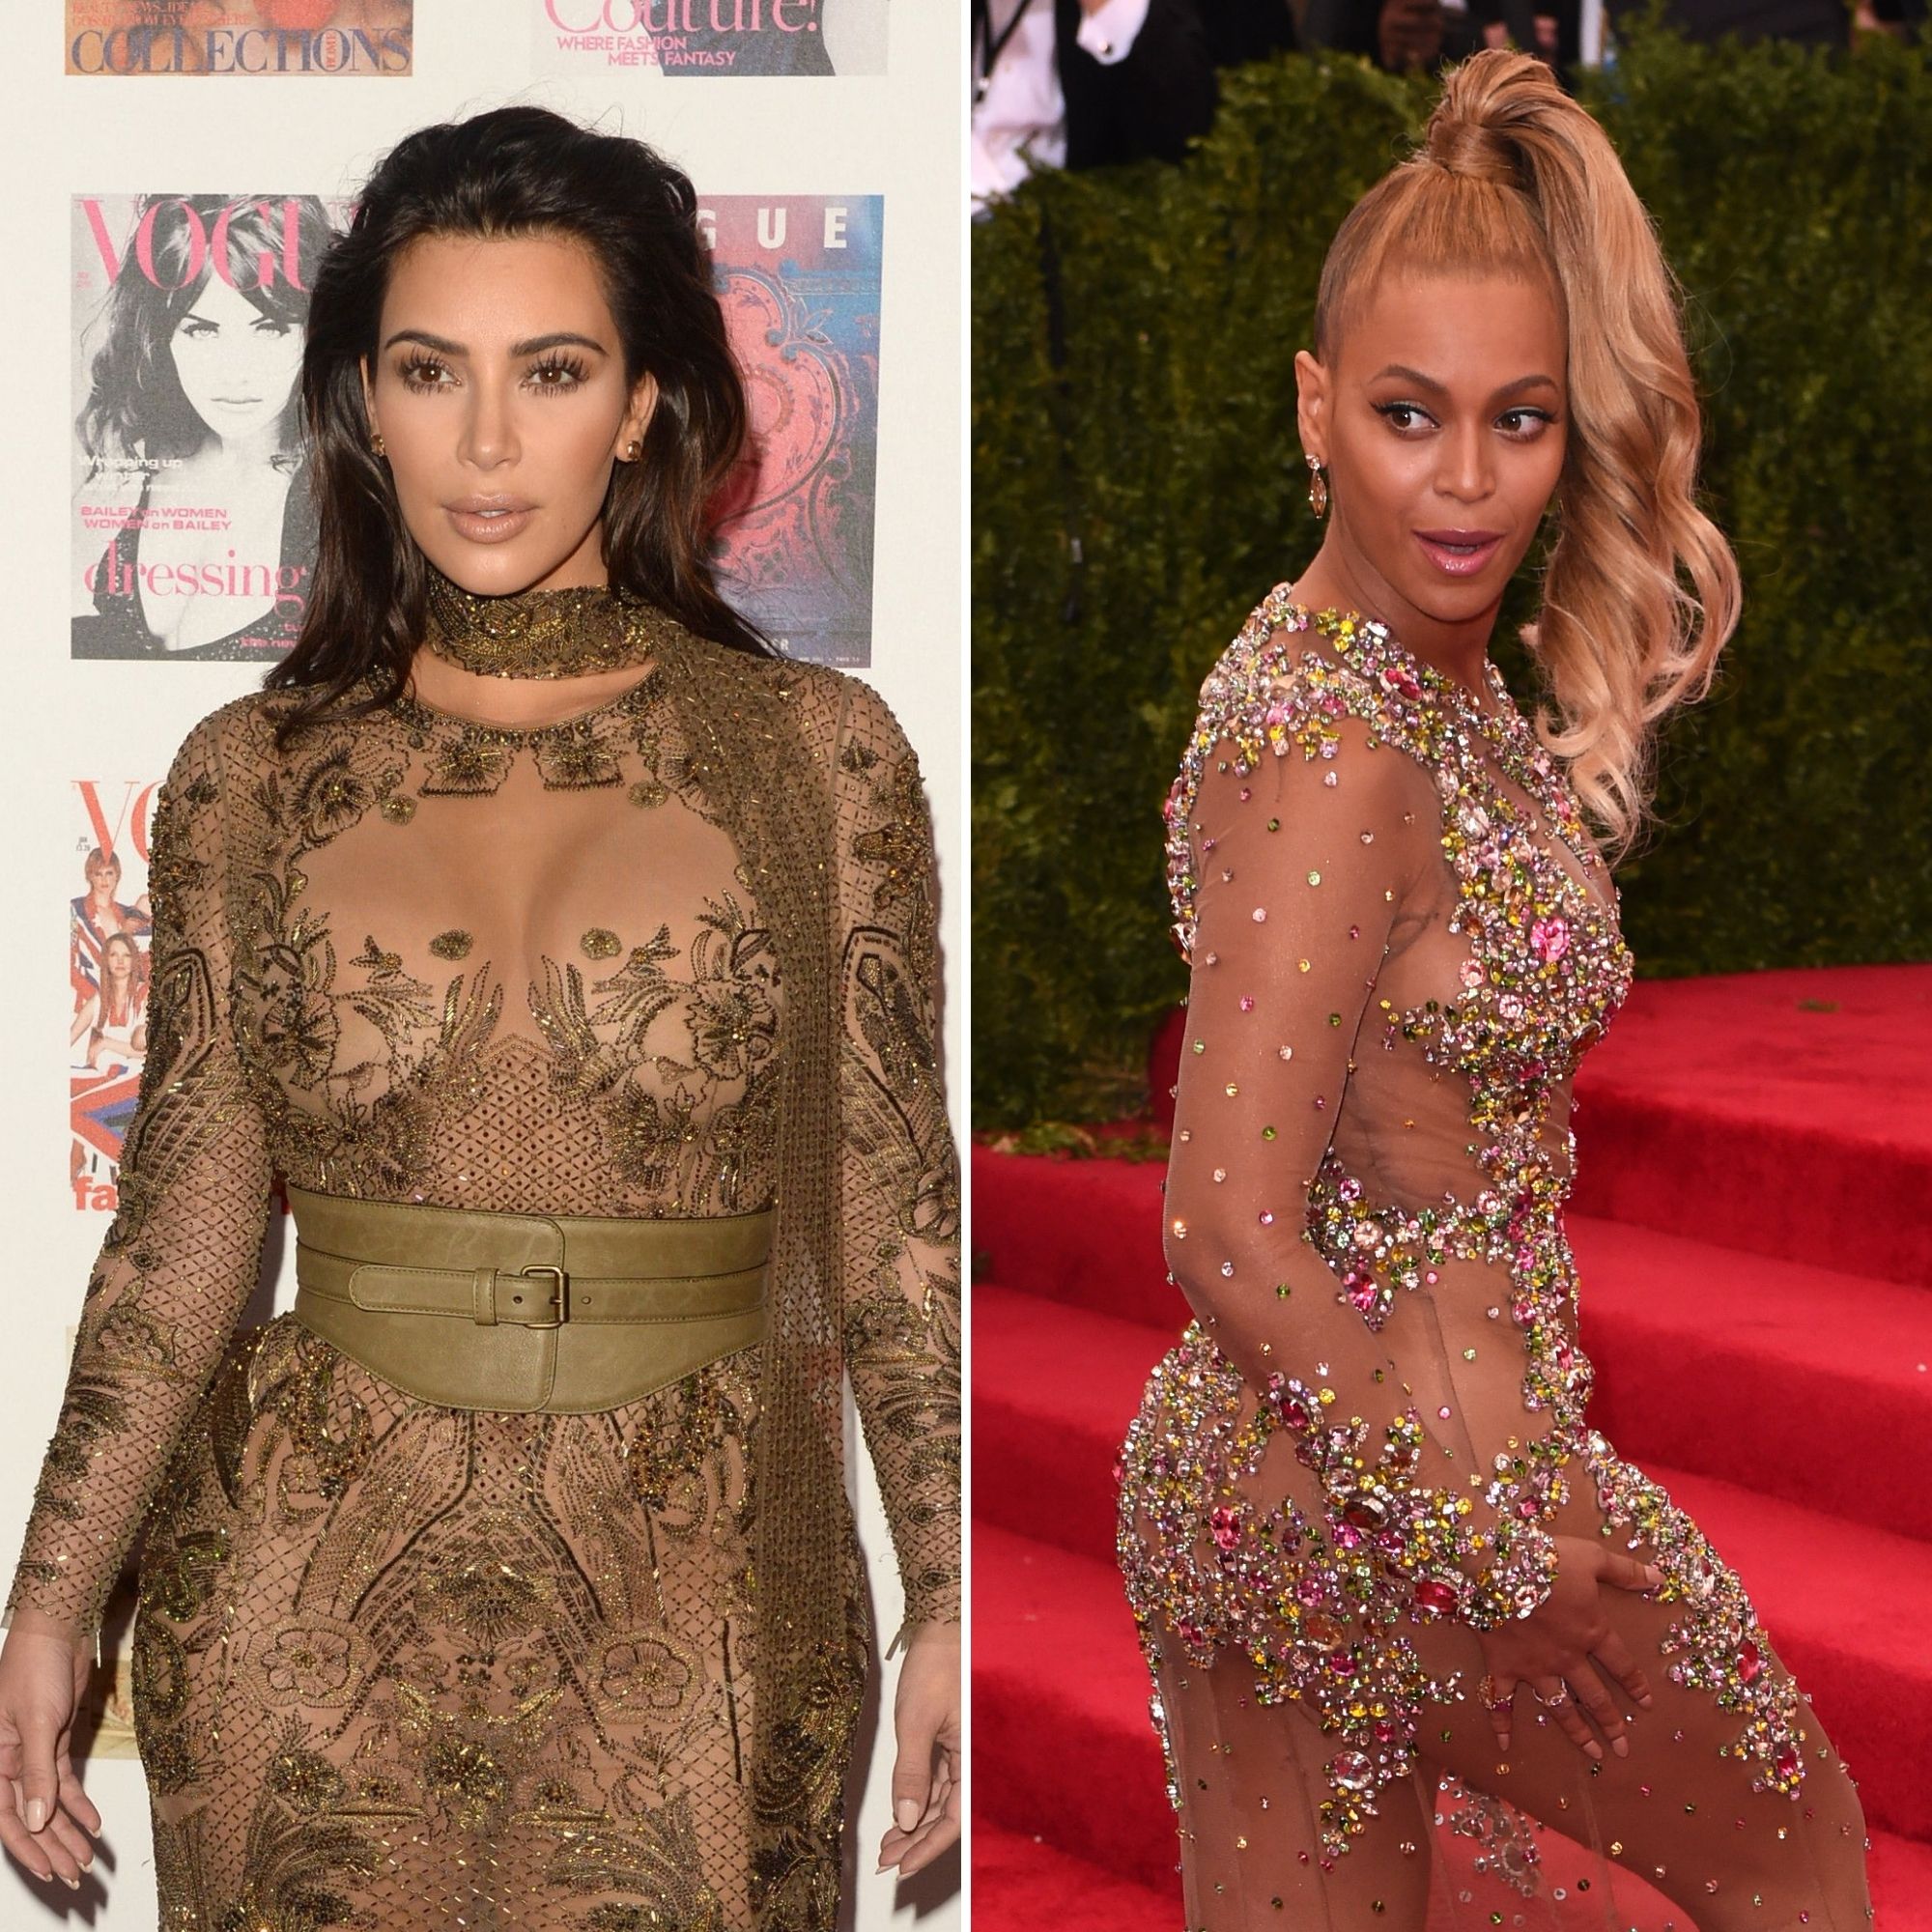 Beyonce Celebrity Porn - Celebrities Wearing Sheer, See-Through Outfits: Photos